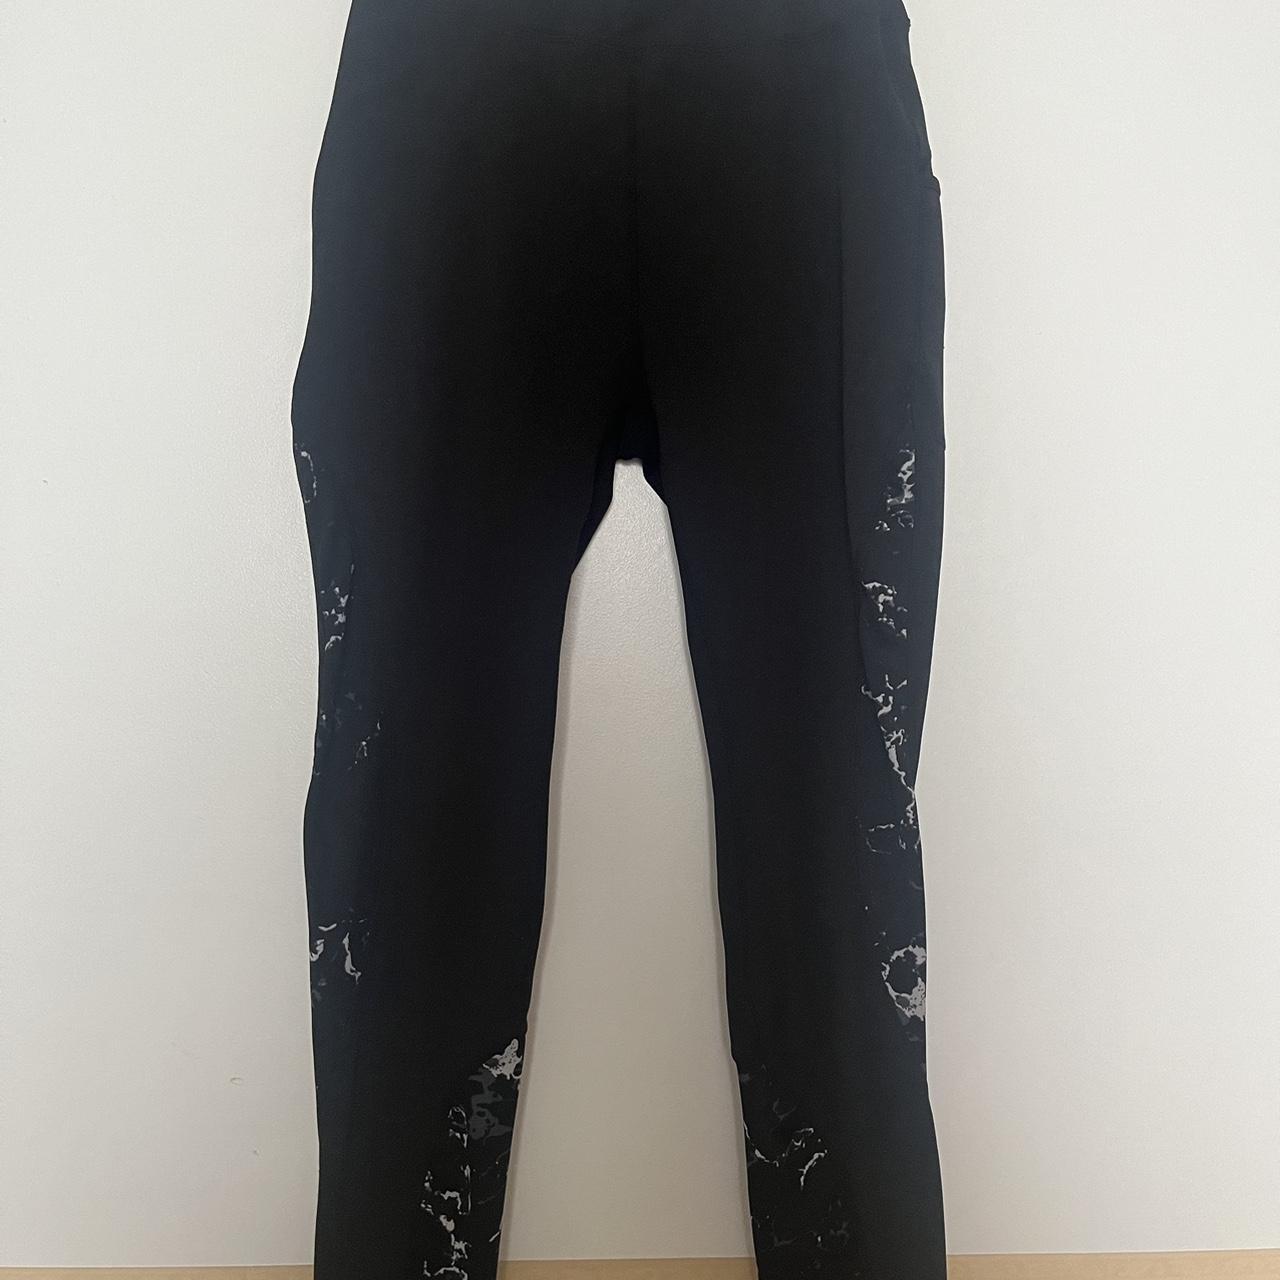 Black and white marbles Pop Fit leggings. , Really